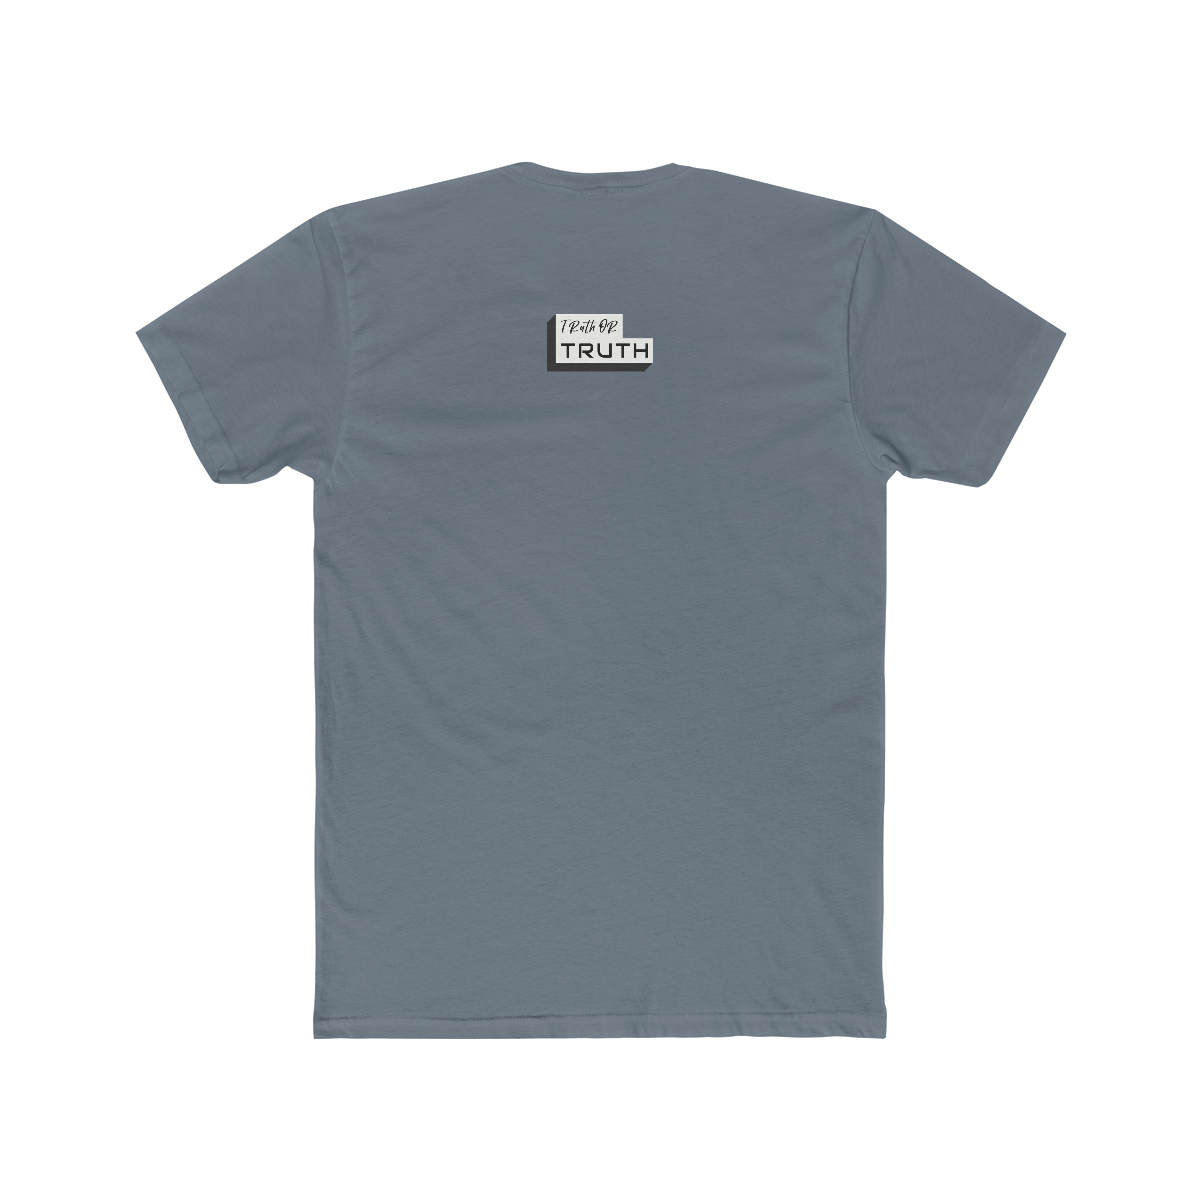 Stay Hydrated Men's Cotton Crew Tee